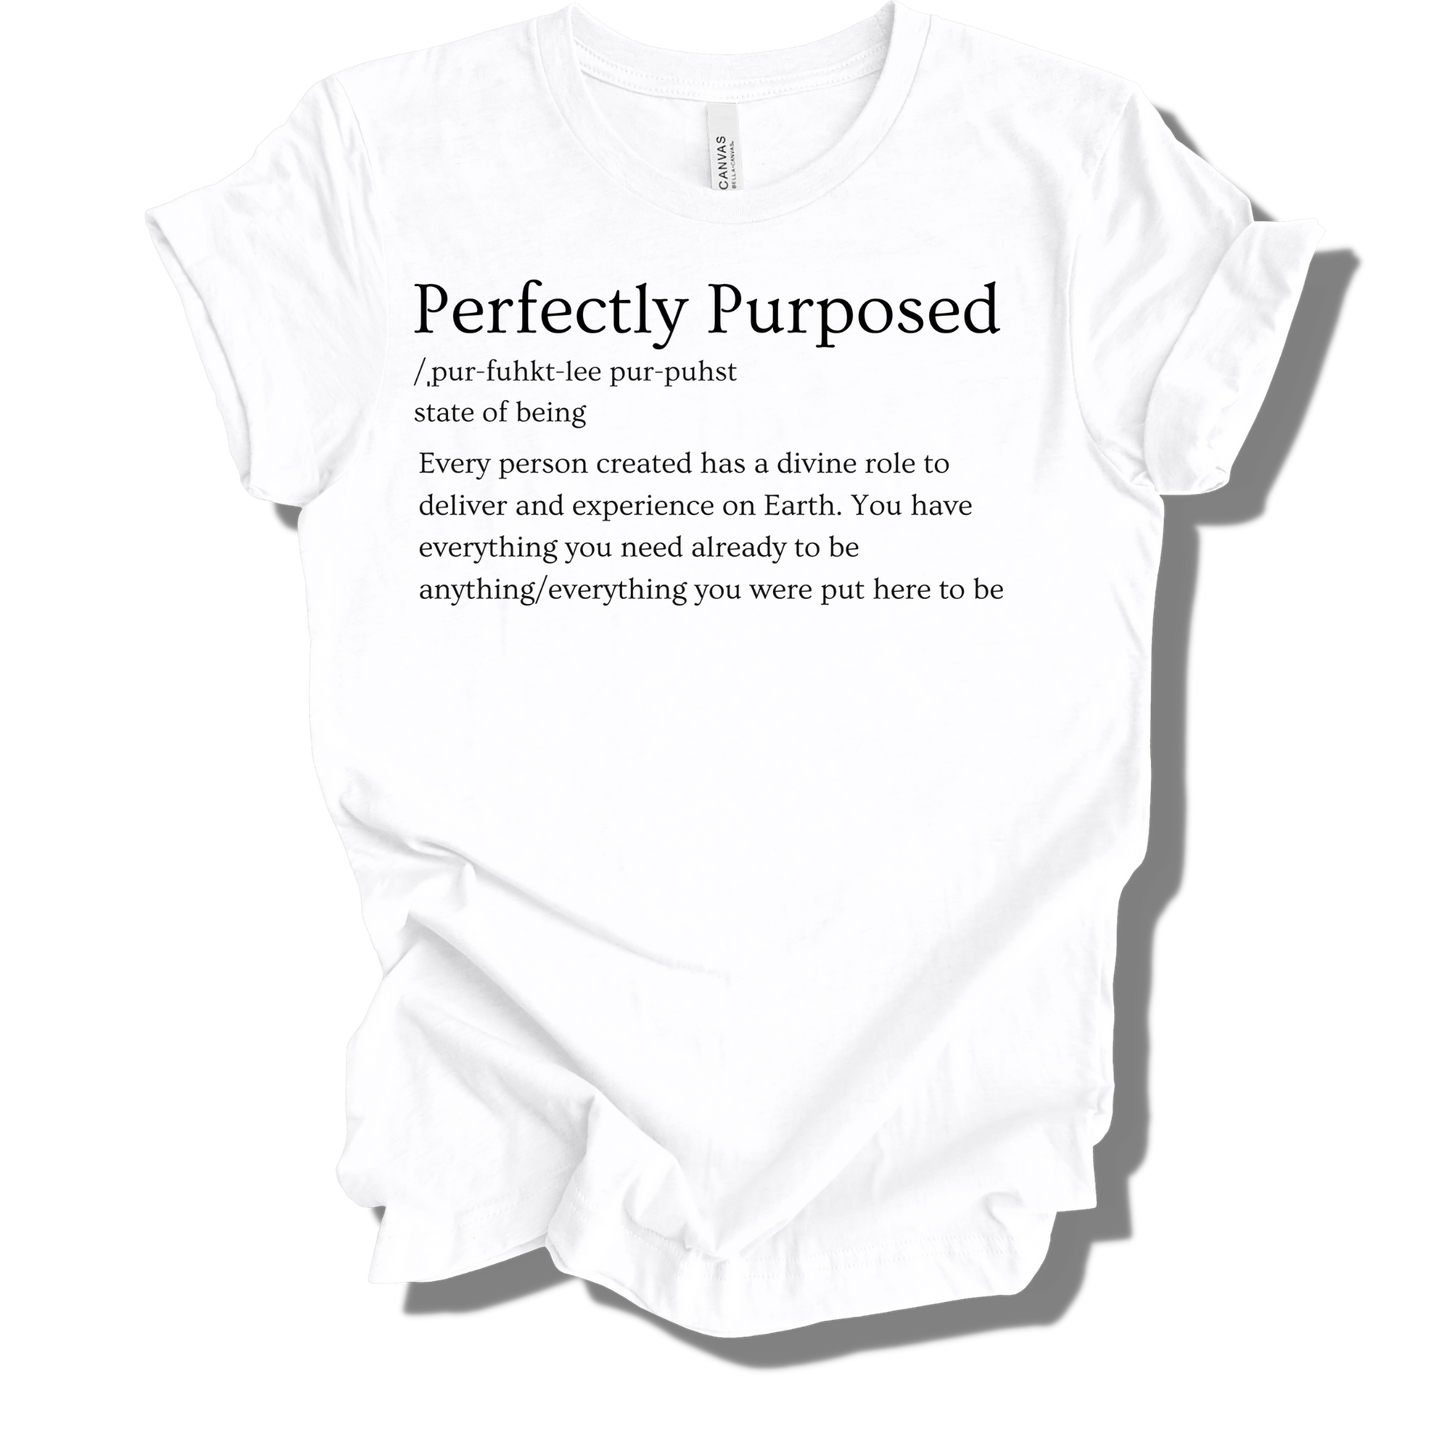 I AM PERFECTLY PURPOSED T-SHIRT